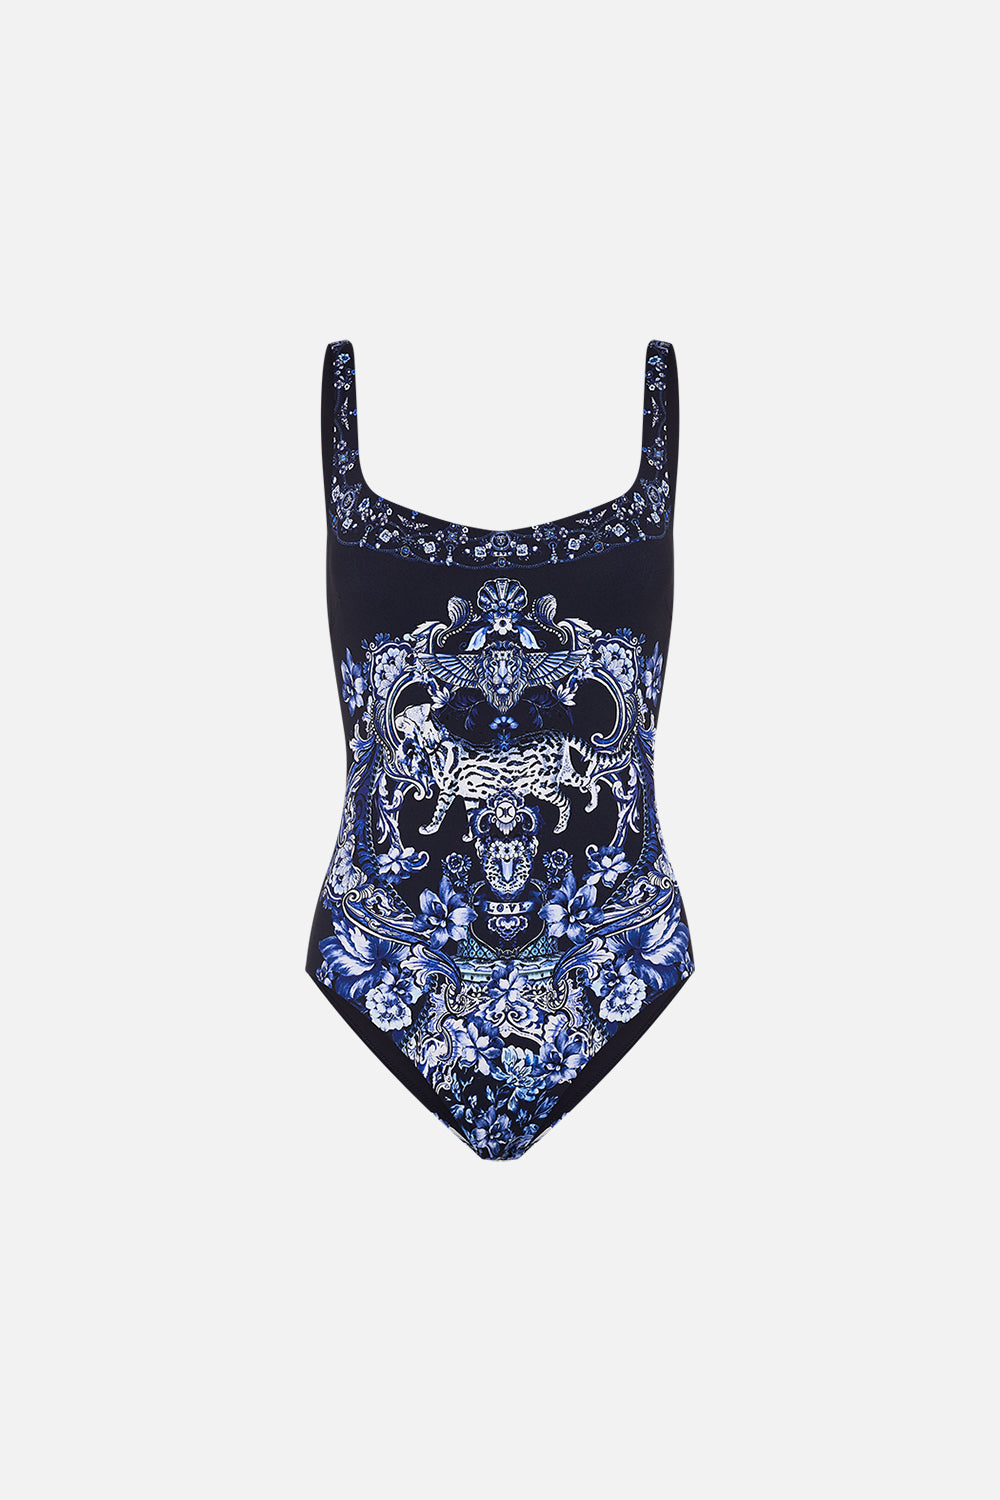 CAMILLA womens one piece swimsuit in Delft Dynasty print